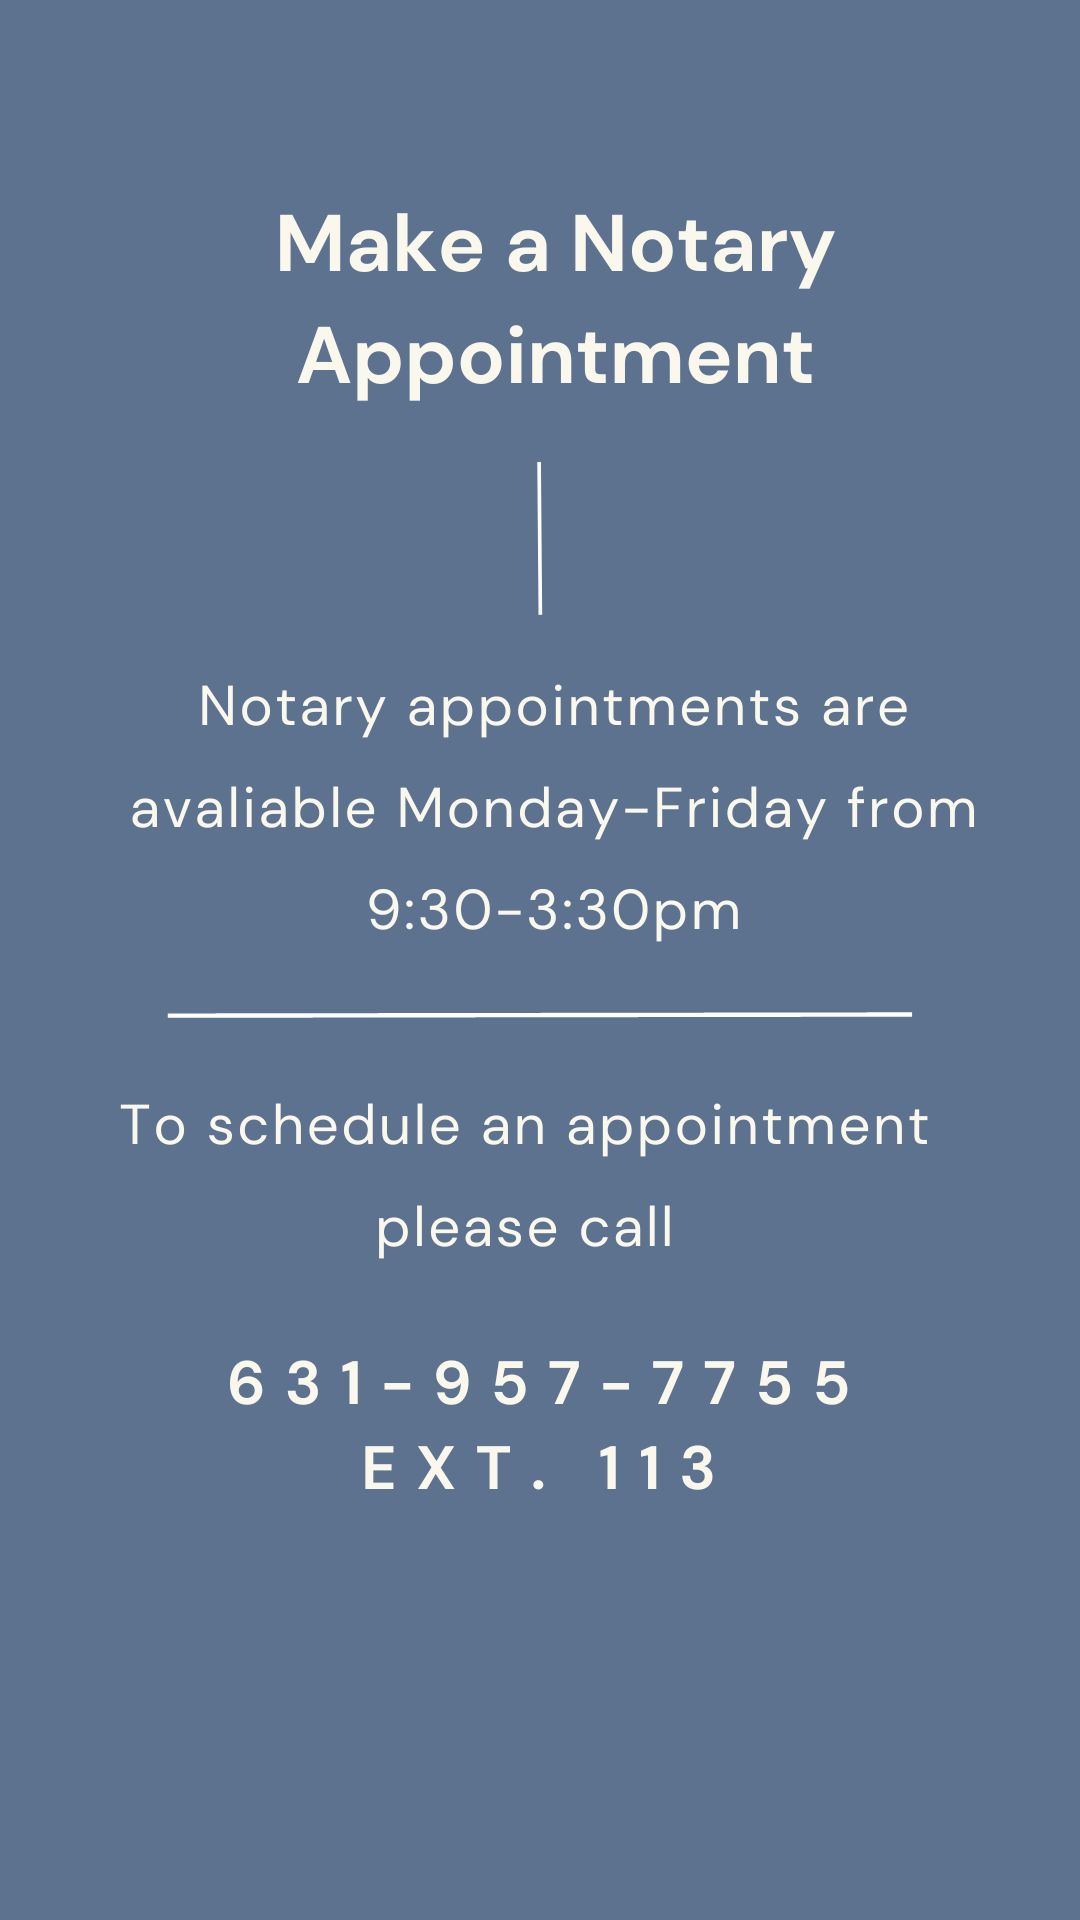 Notary Appointment image that reads "Make a Notary Appointment: Notary Appointments are available Monday-Friday from 9:30-3:30 PM. To schedule an appointment please call 631-957-7755 extension 113